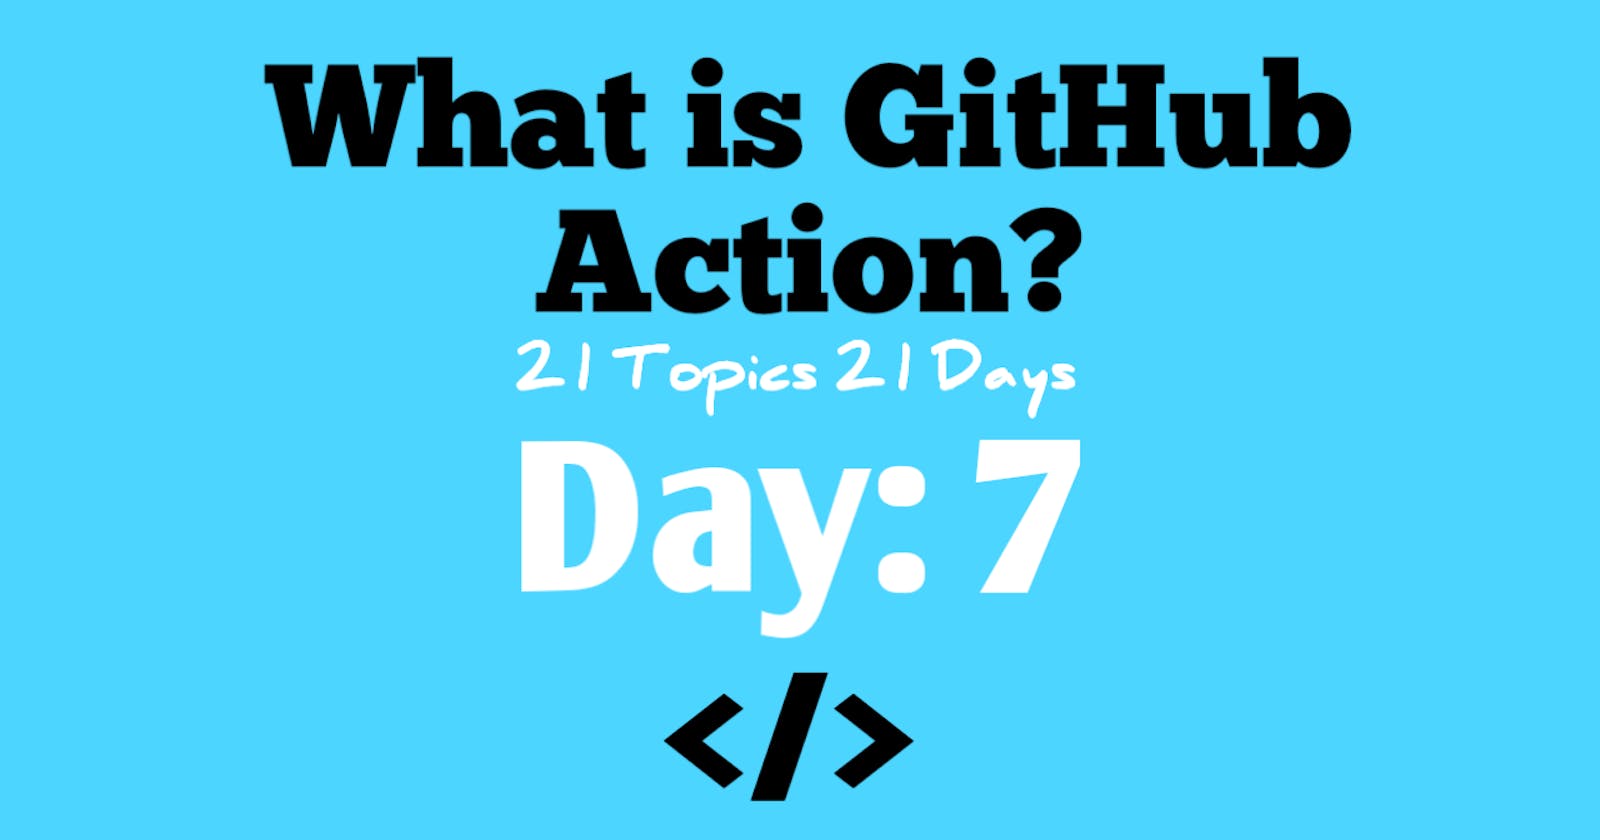 What is GitHub Action?